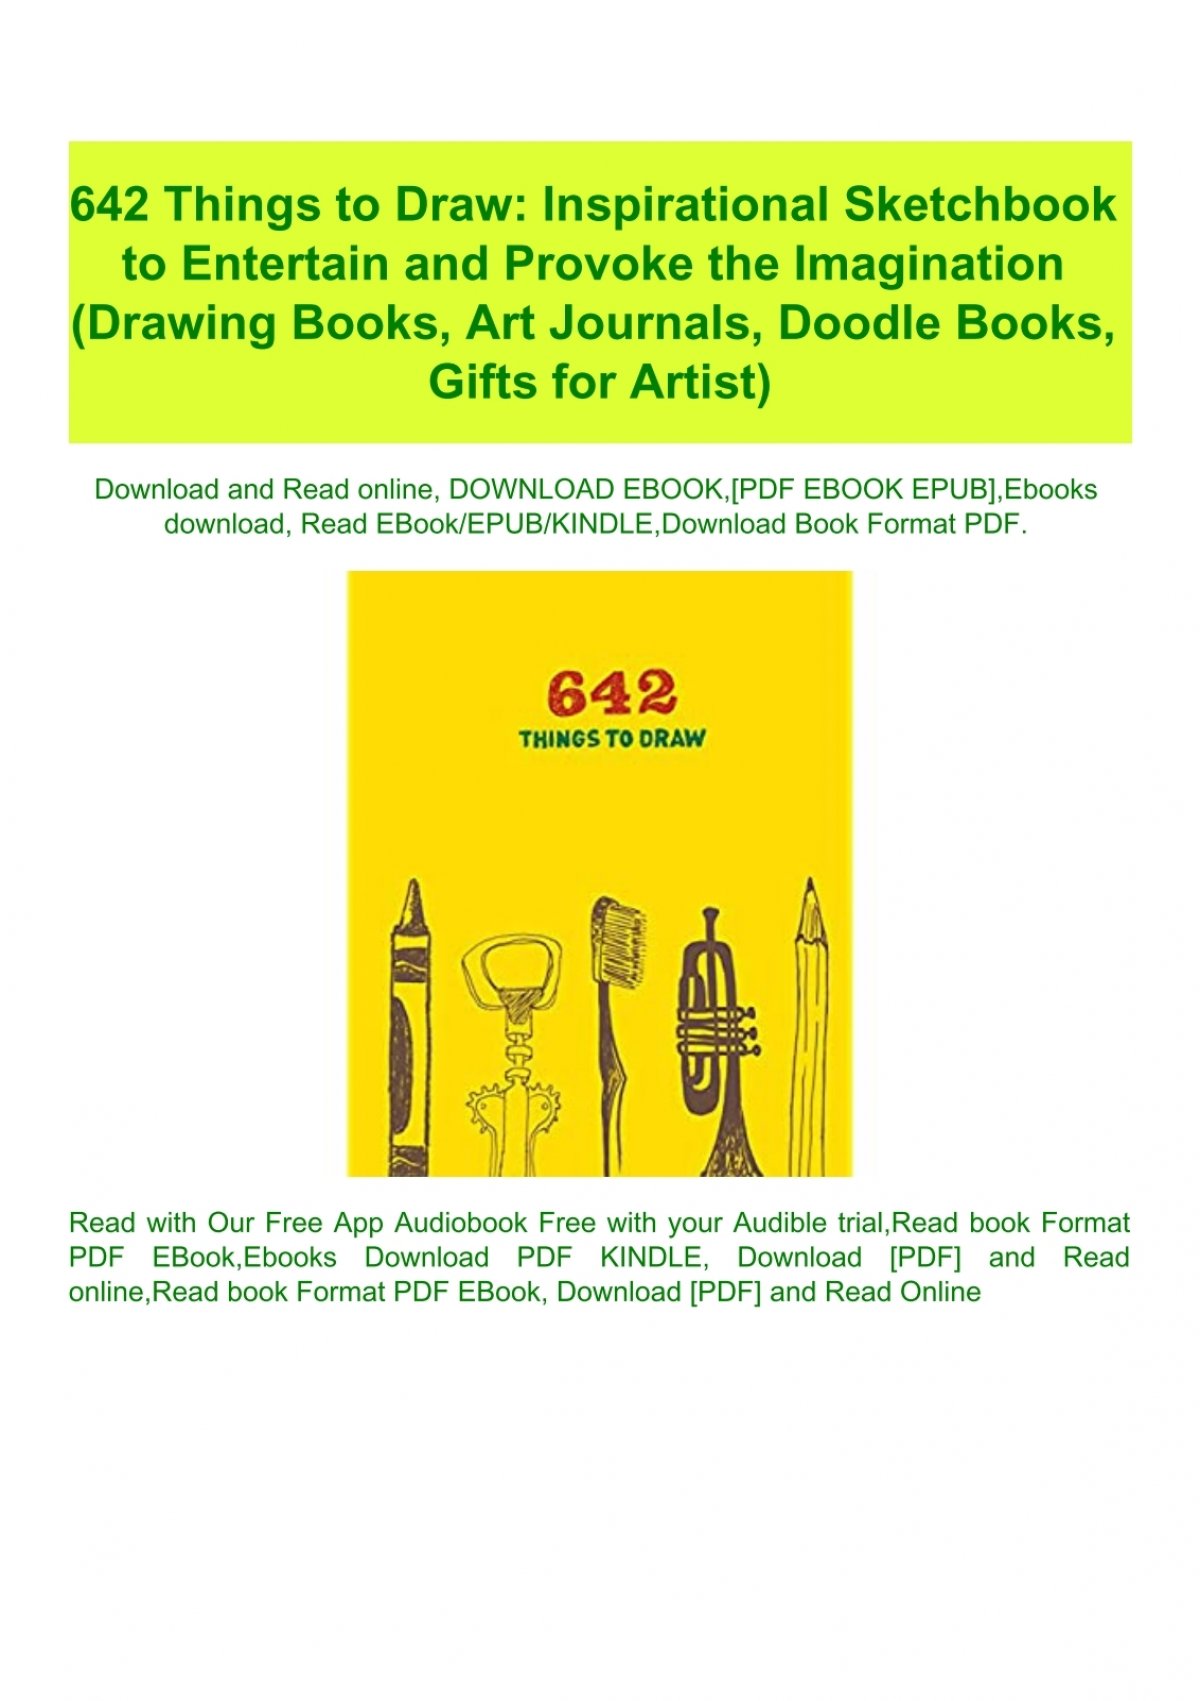 642 Things to Draw: Inspirational Sketchbook to Entertain and Provoke the  Imagination (Drawing Books, Art Journals, Doodle Books, Gifts for Artist)